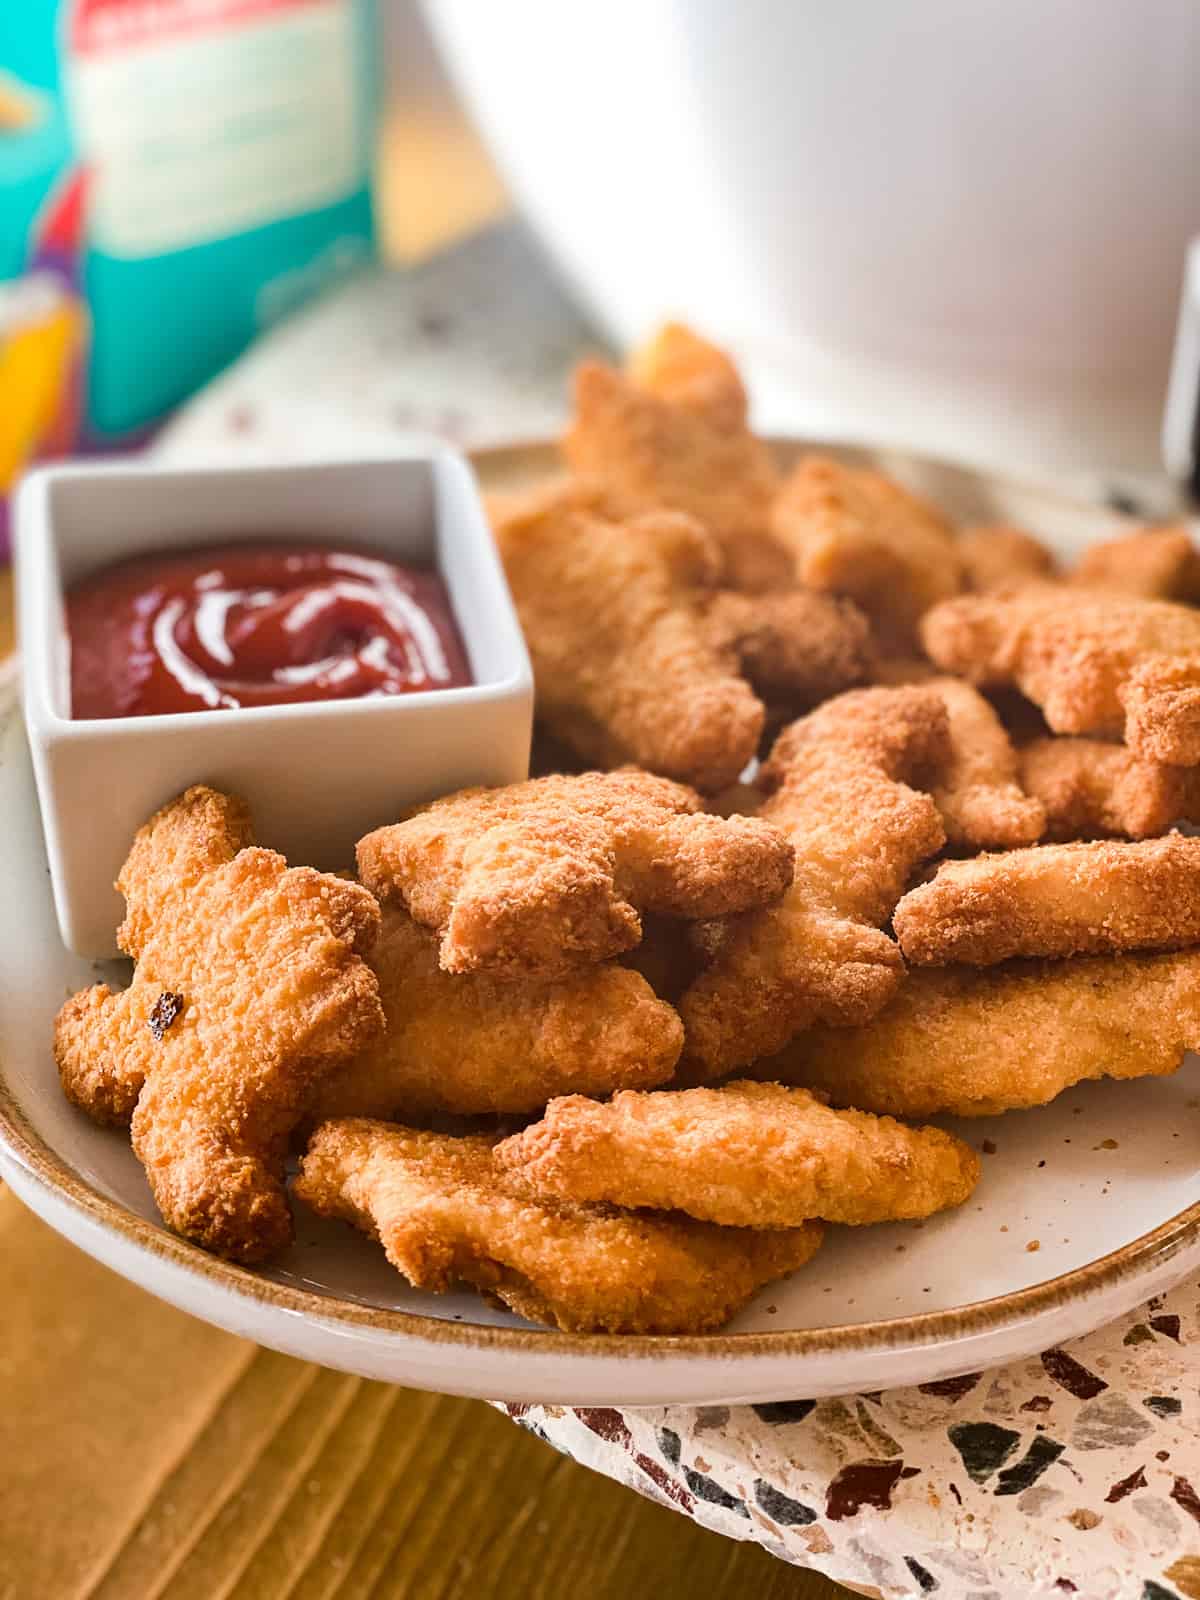 Dino nuggets air fryer style on a plate with ketchup